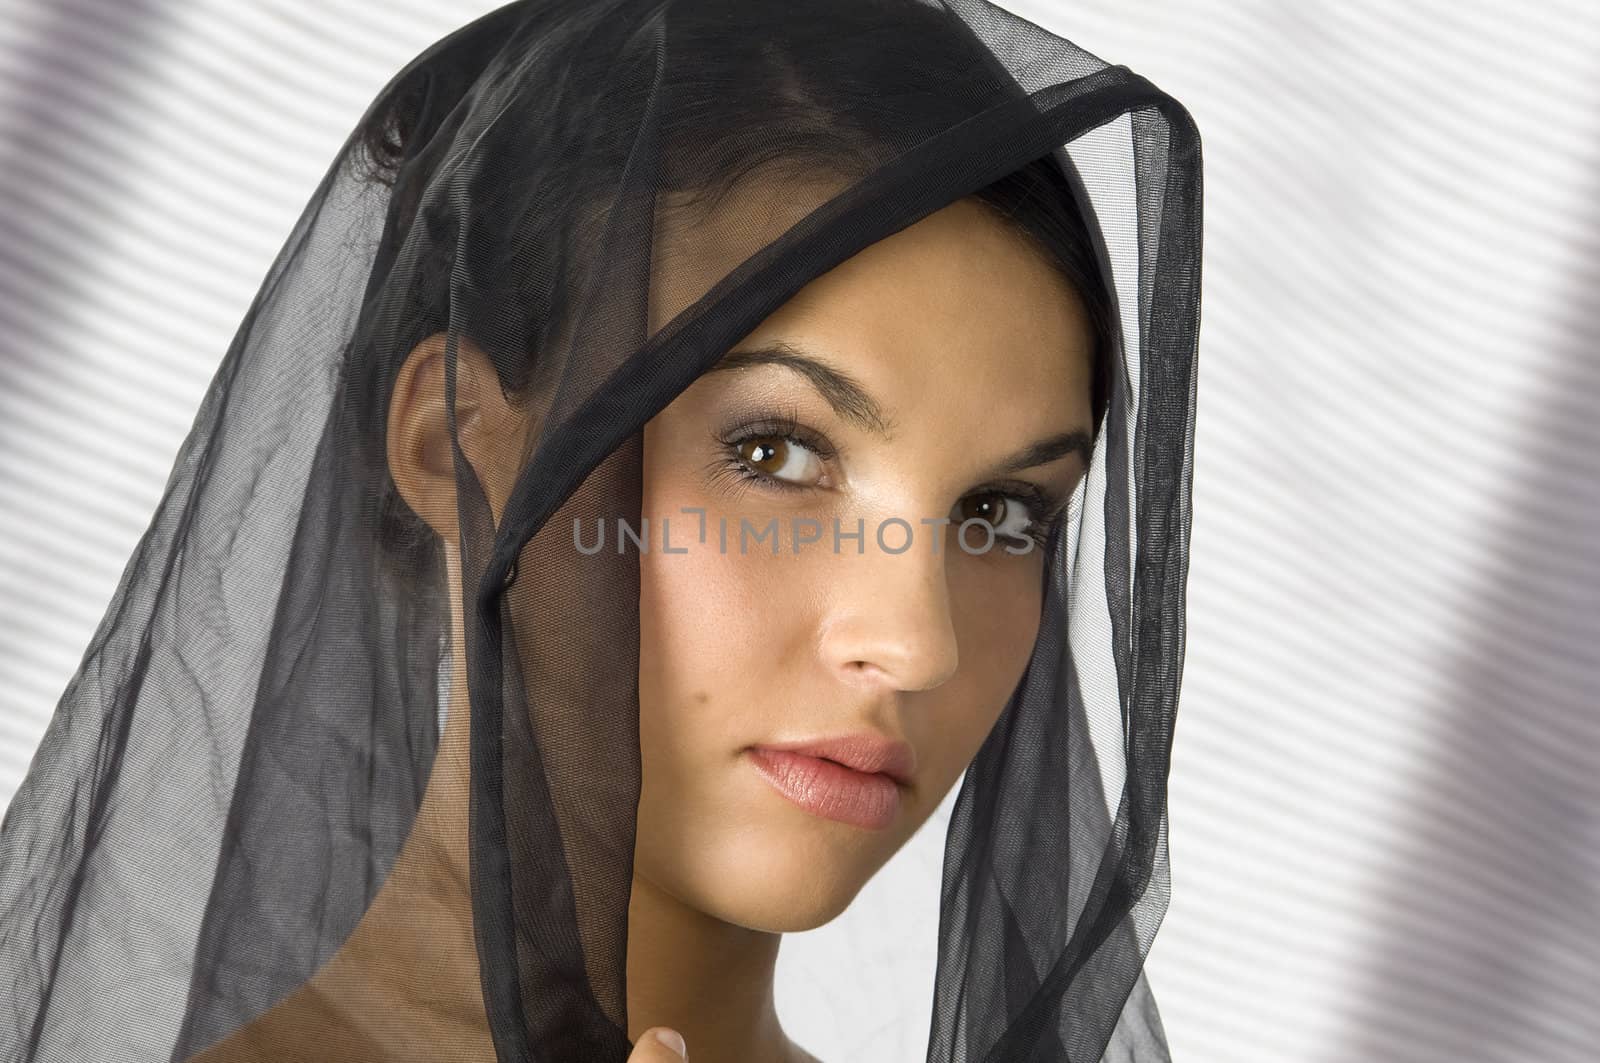 nice portrait of a young woman with a black veil on her head